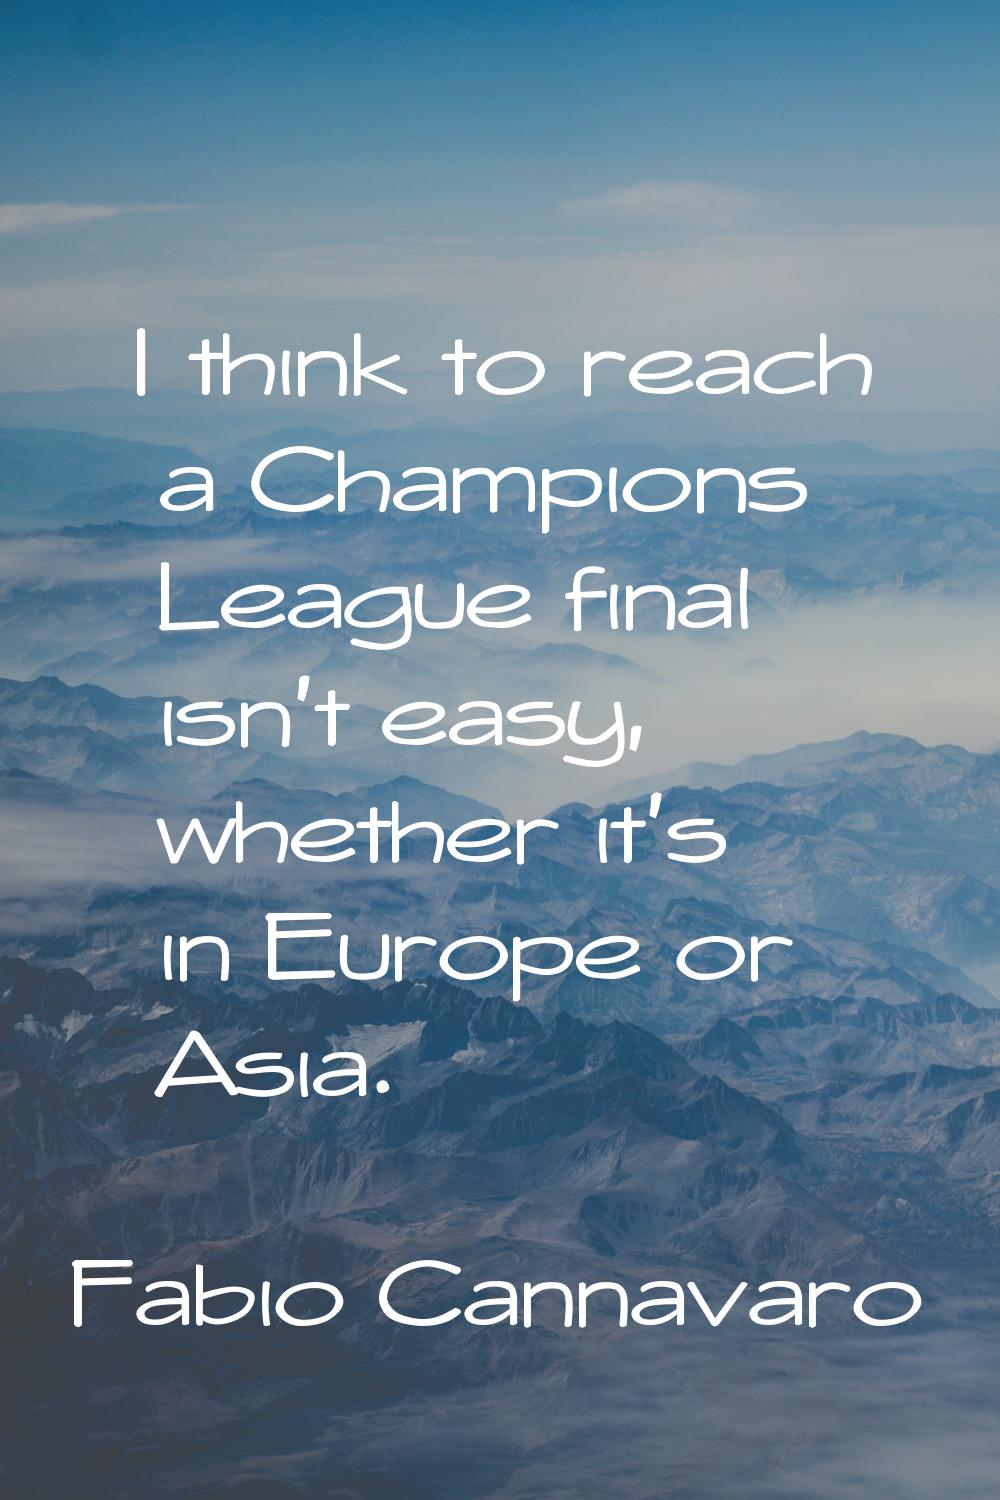 I think to reach a Champions League final isn't easy, whether it's in Europe or Asia.